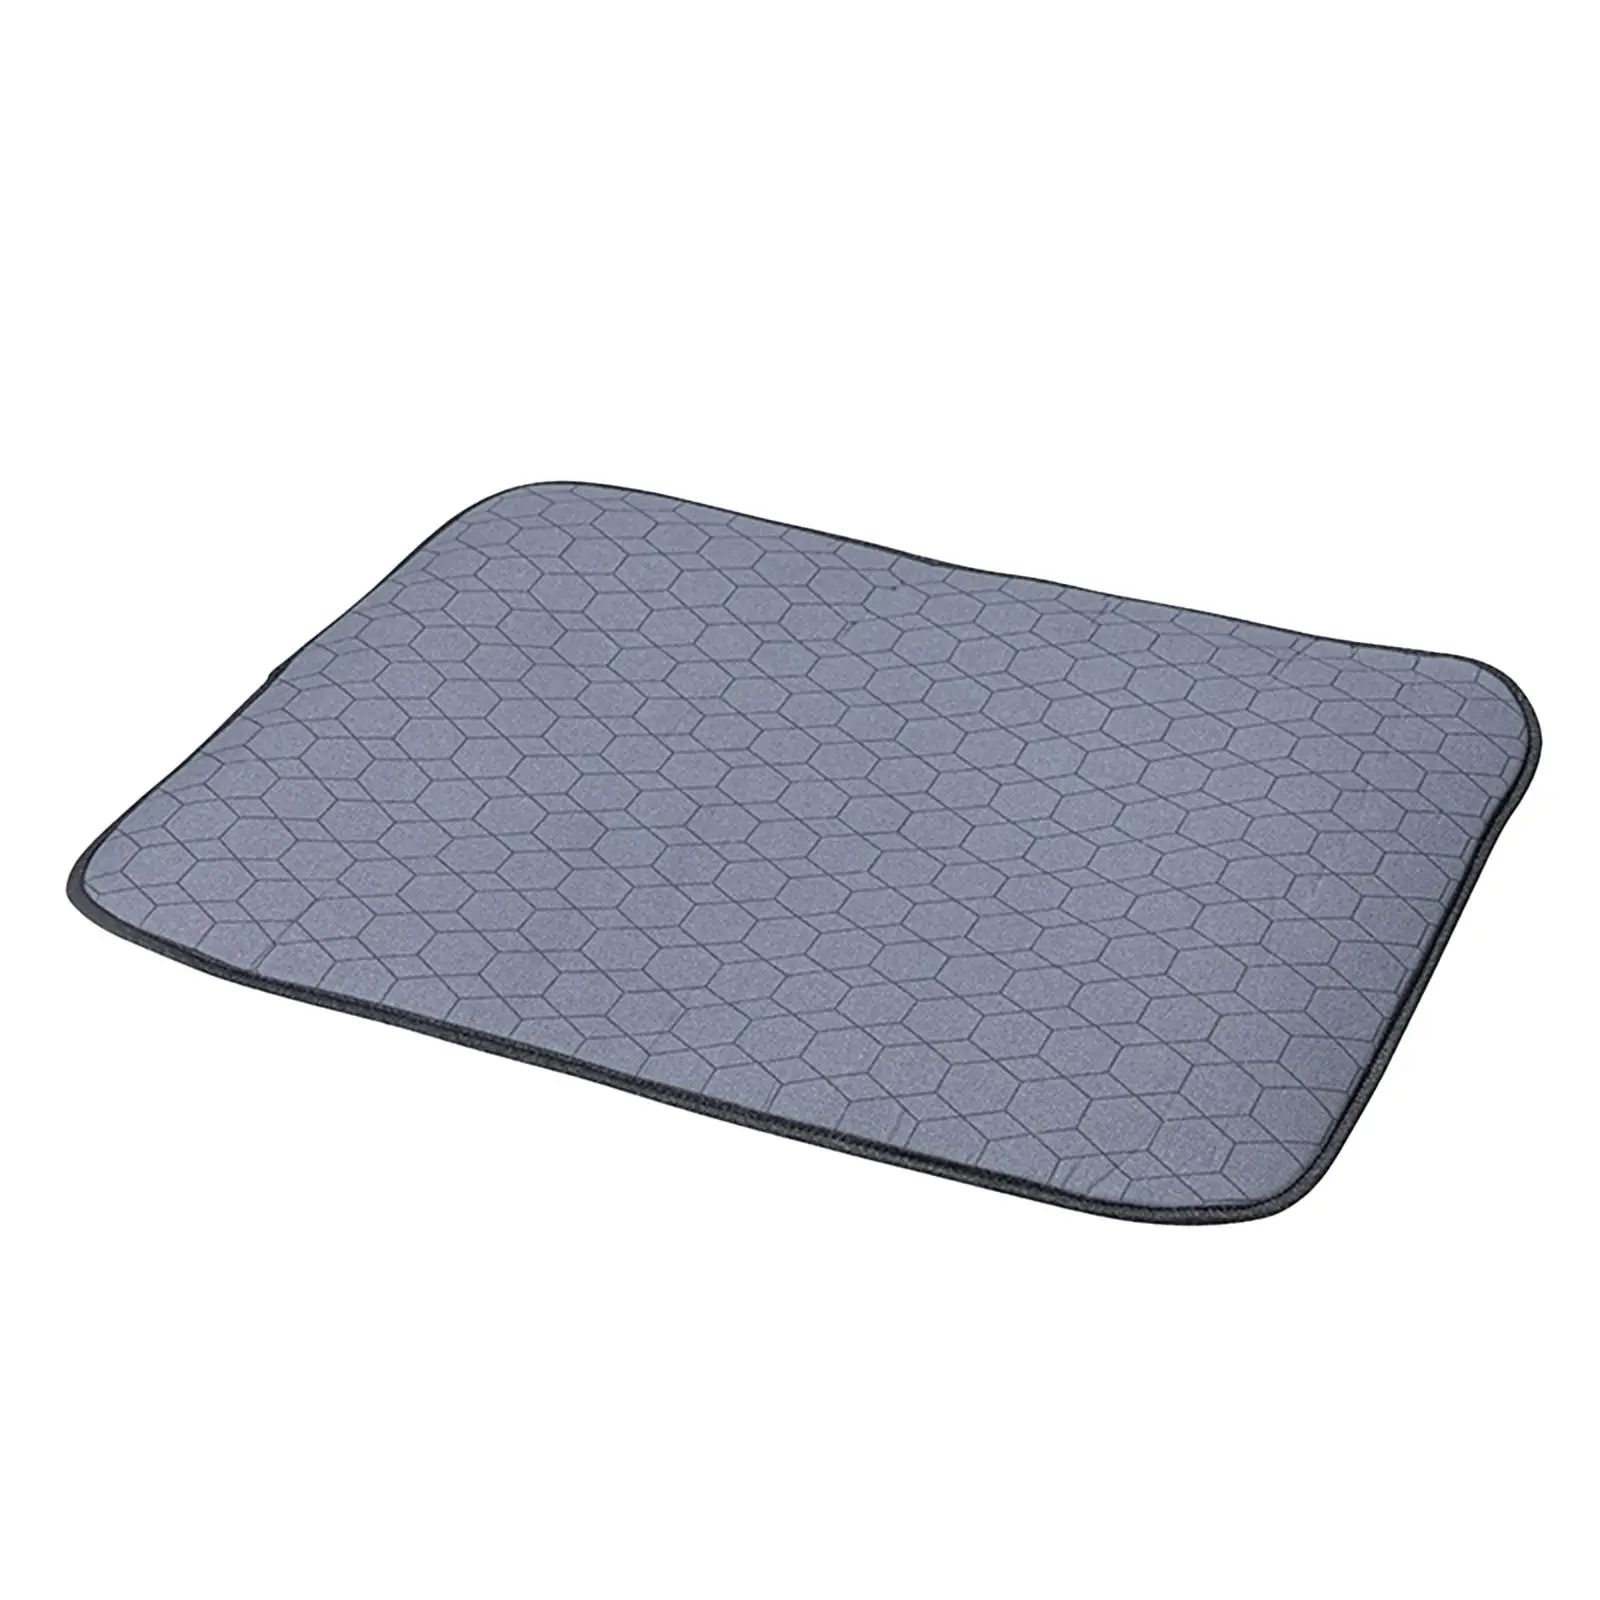 Ironing Mat Foldable Portable Stain Resistant Portable Tabletop Iron Board for Dorm Laundry Room Travel Sewing Room Collars